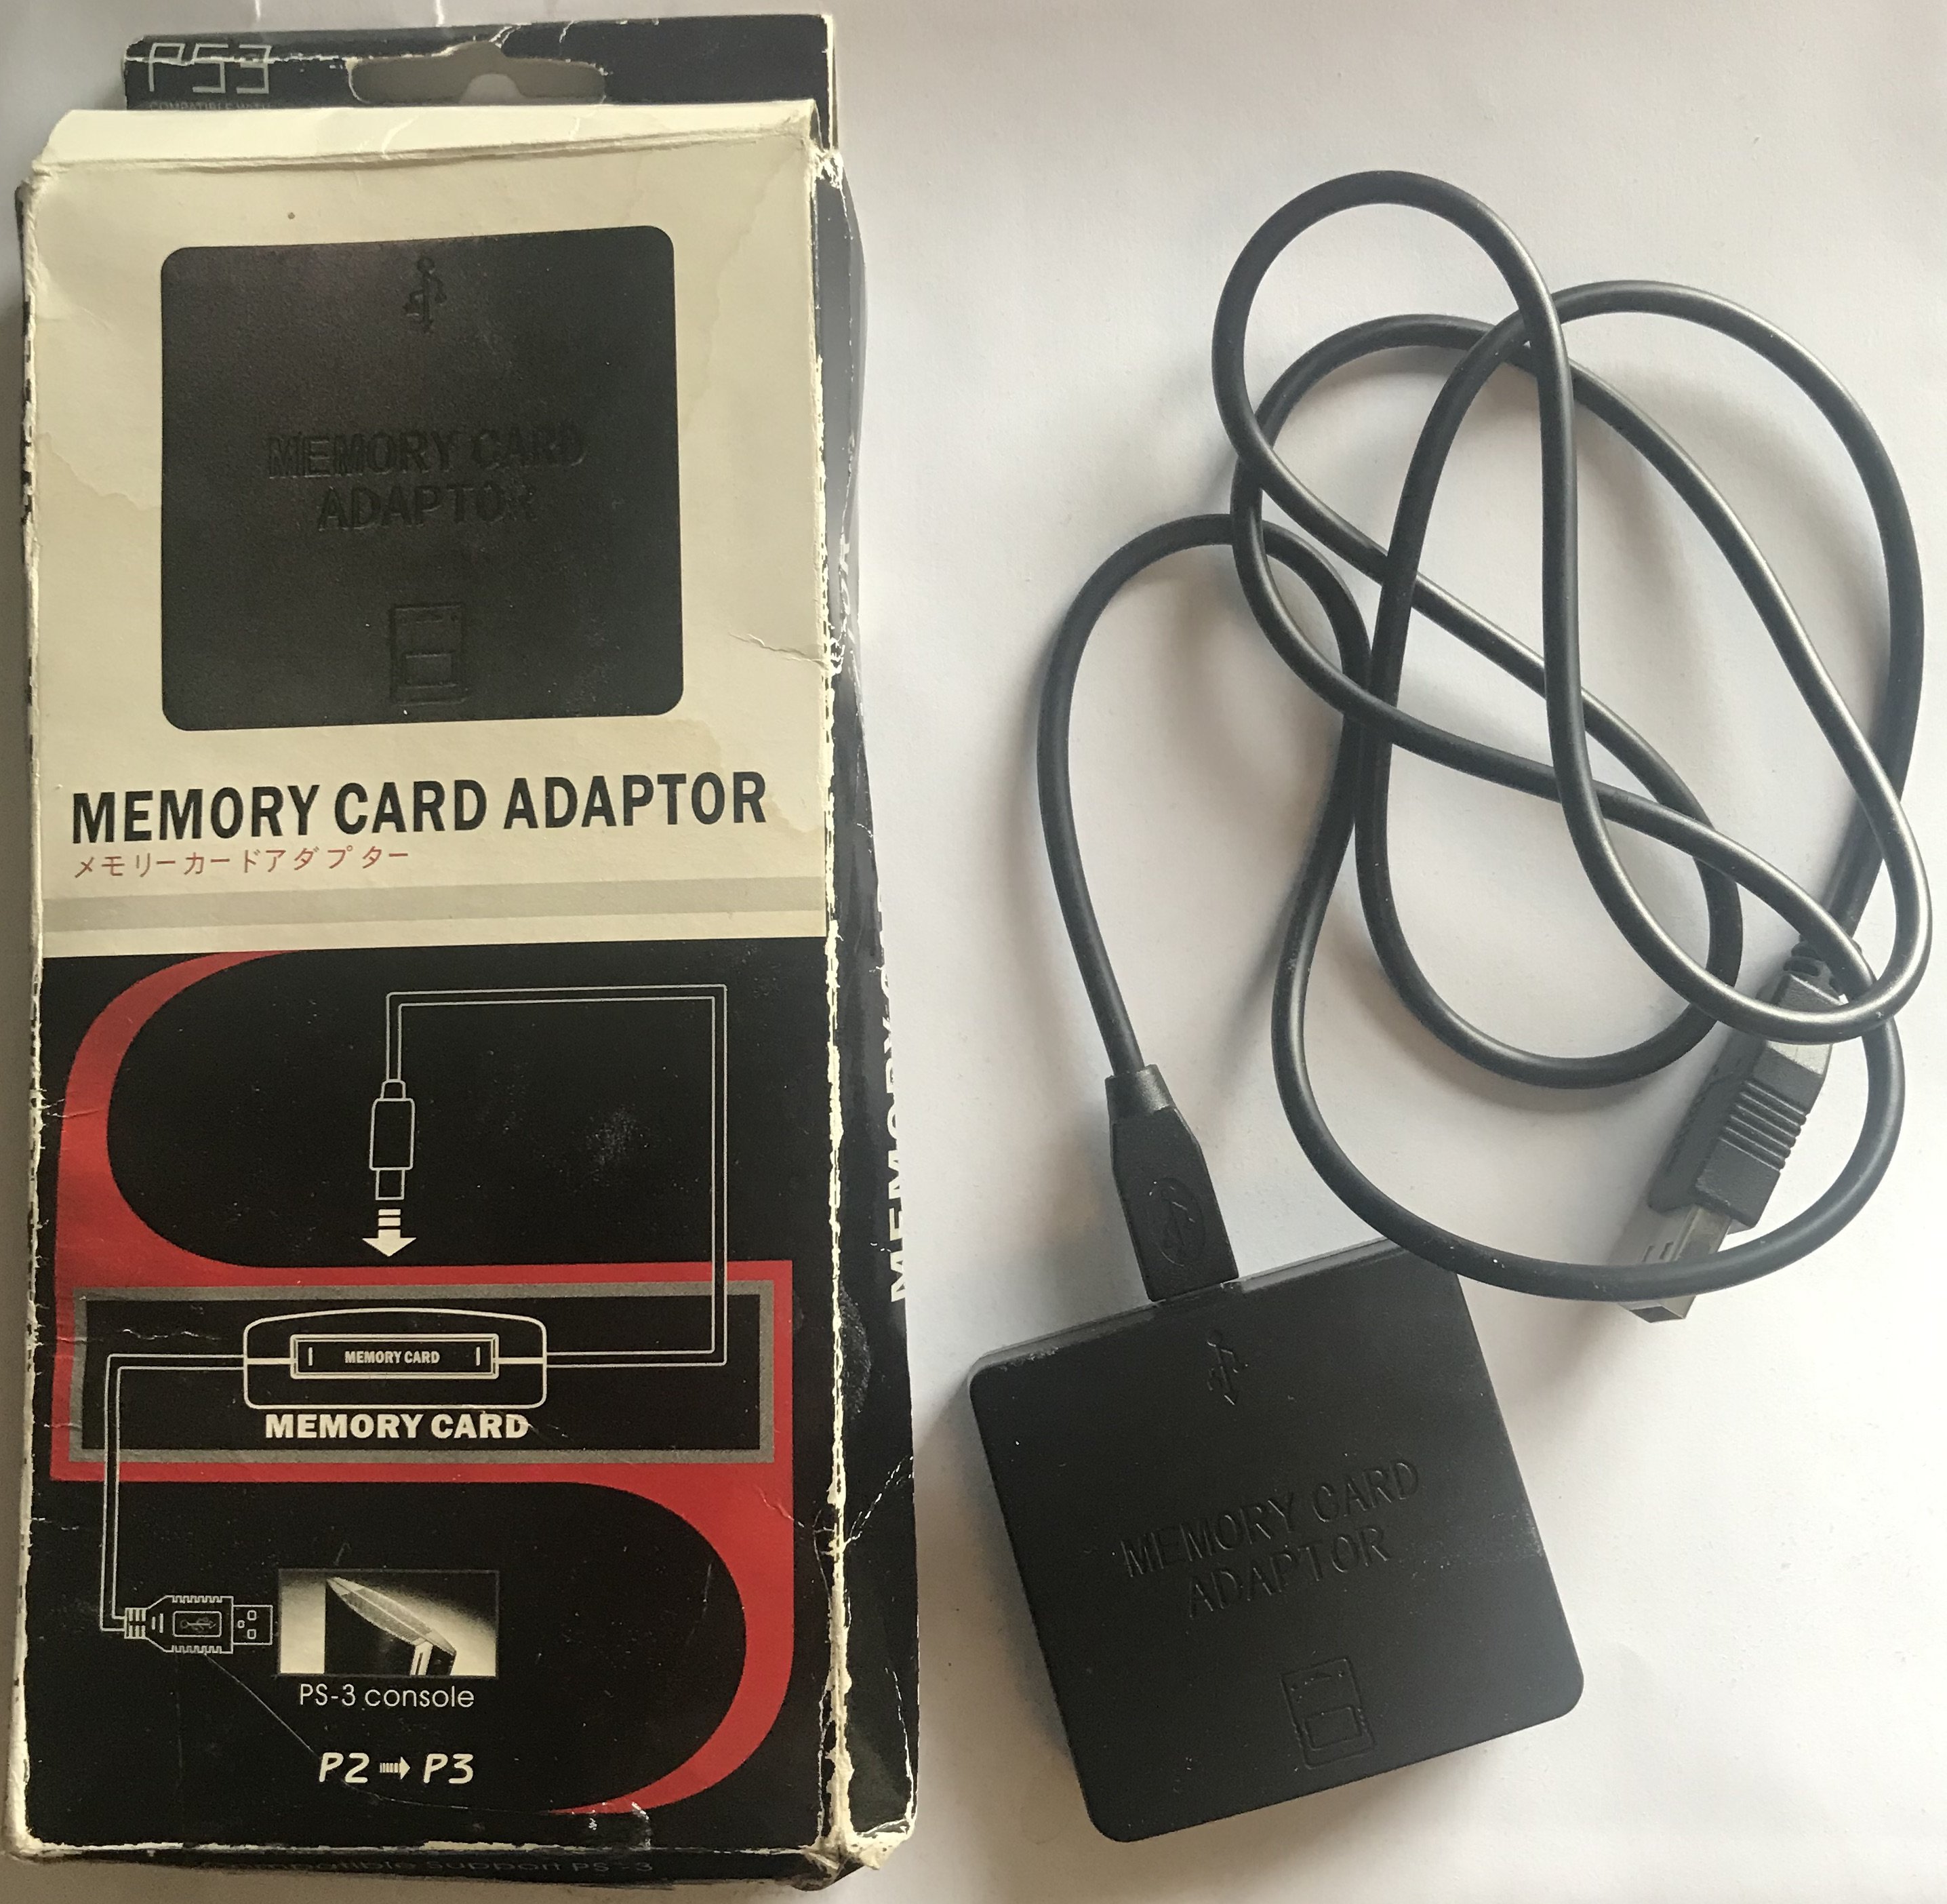 photo of the front of the packaging for a ”Memory Card Adaptor” and the device itself, which is a small black box connected to a USB cable